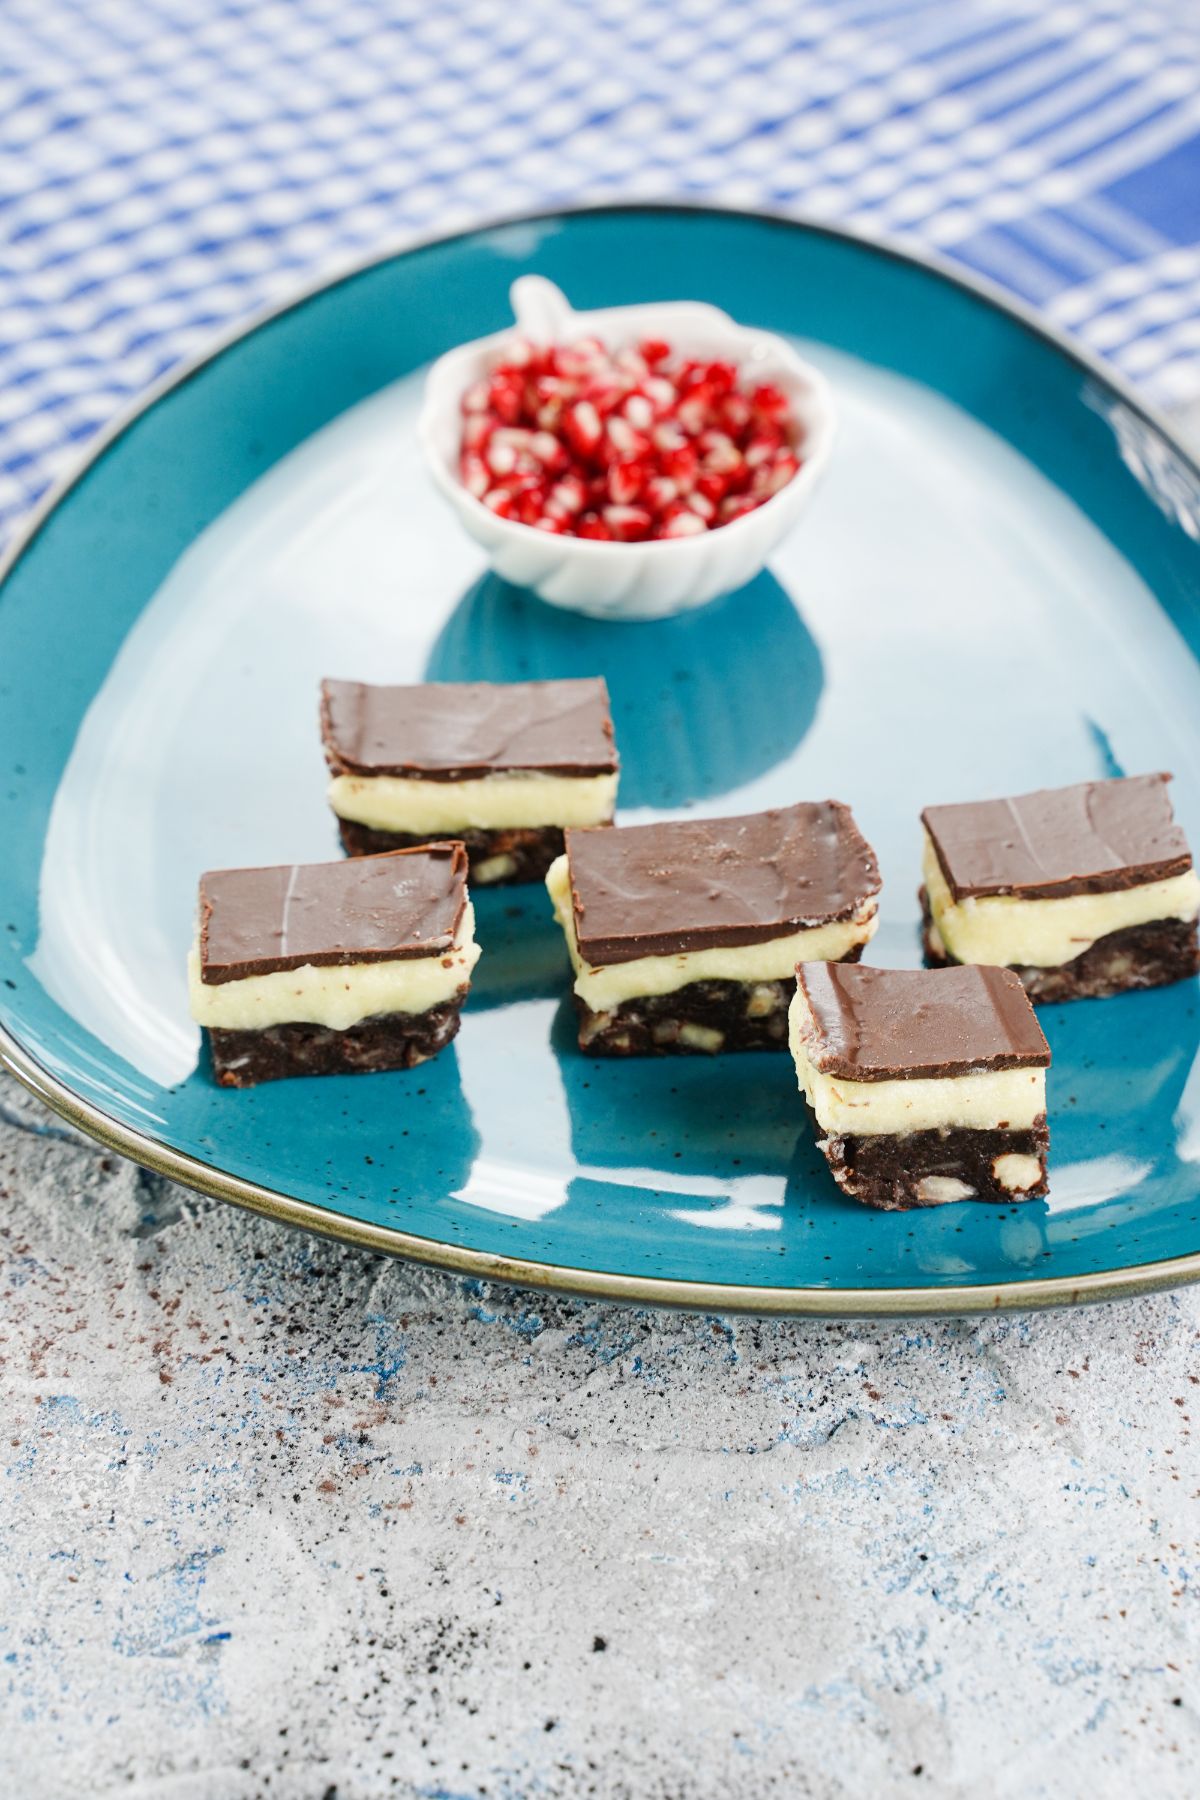 Copycat Nanaimo Bars served on a blue plate